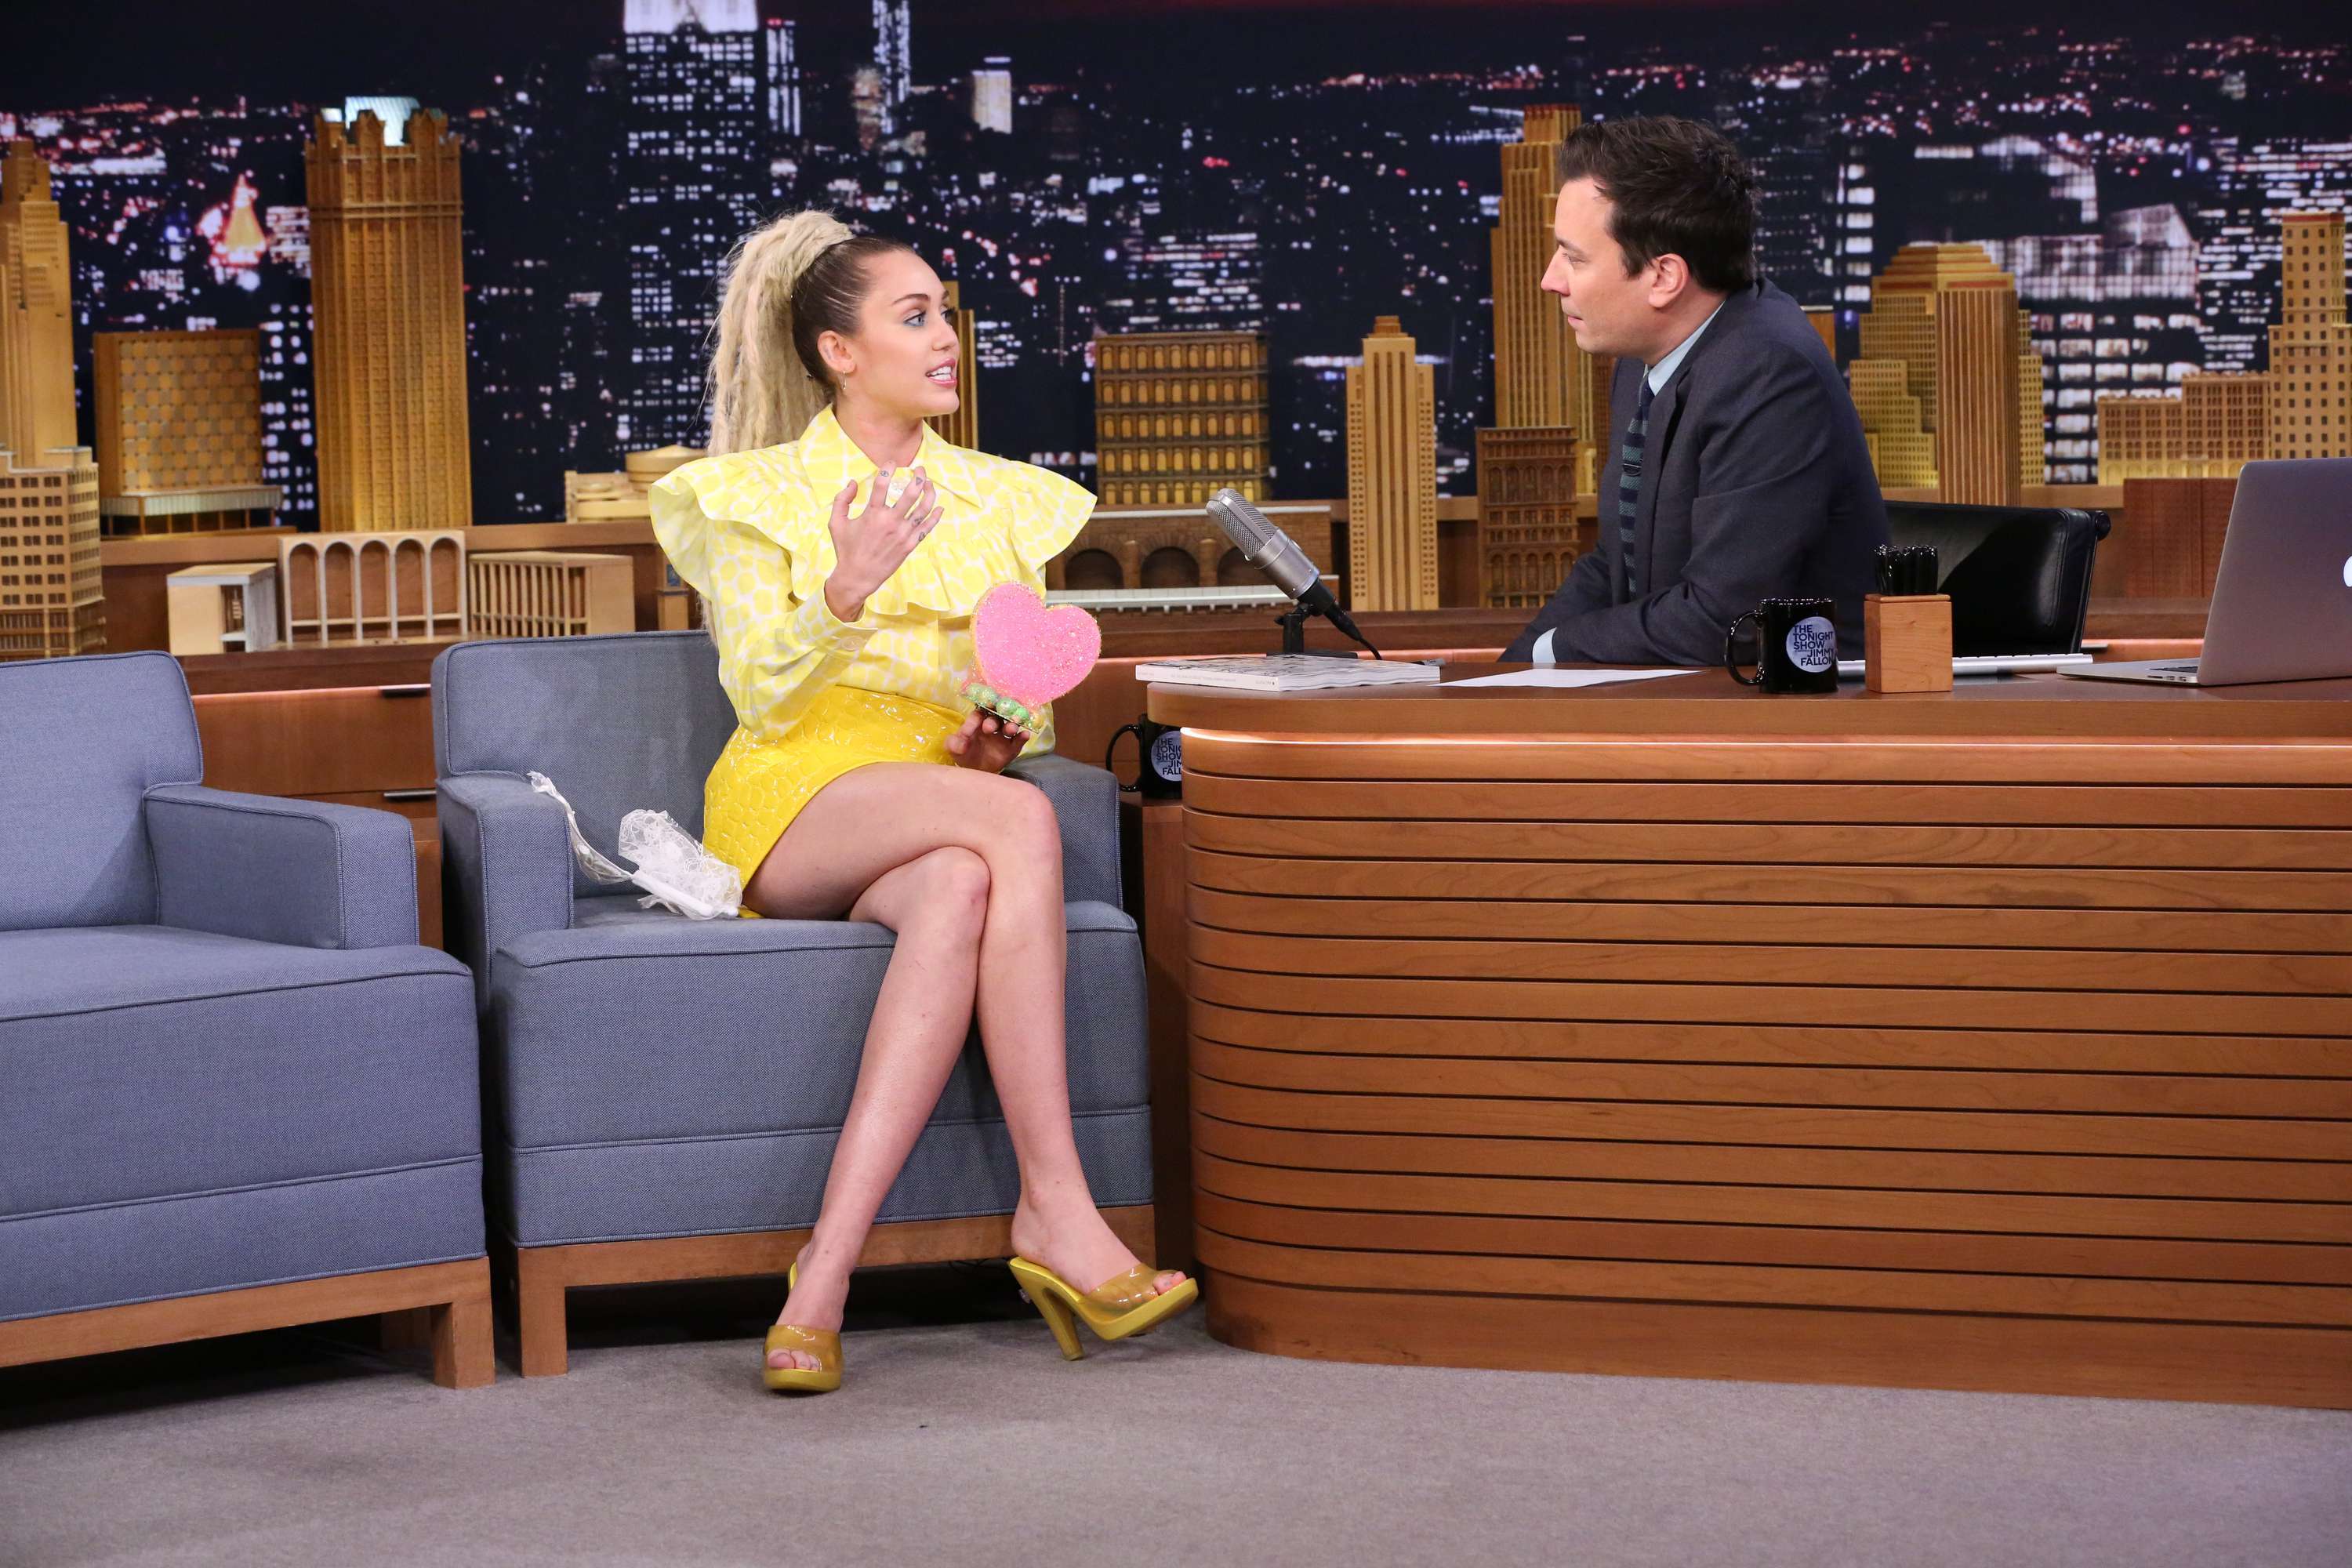 Miley Cyrus in The Tonight Show Starring Jimmy Fallon